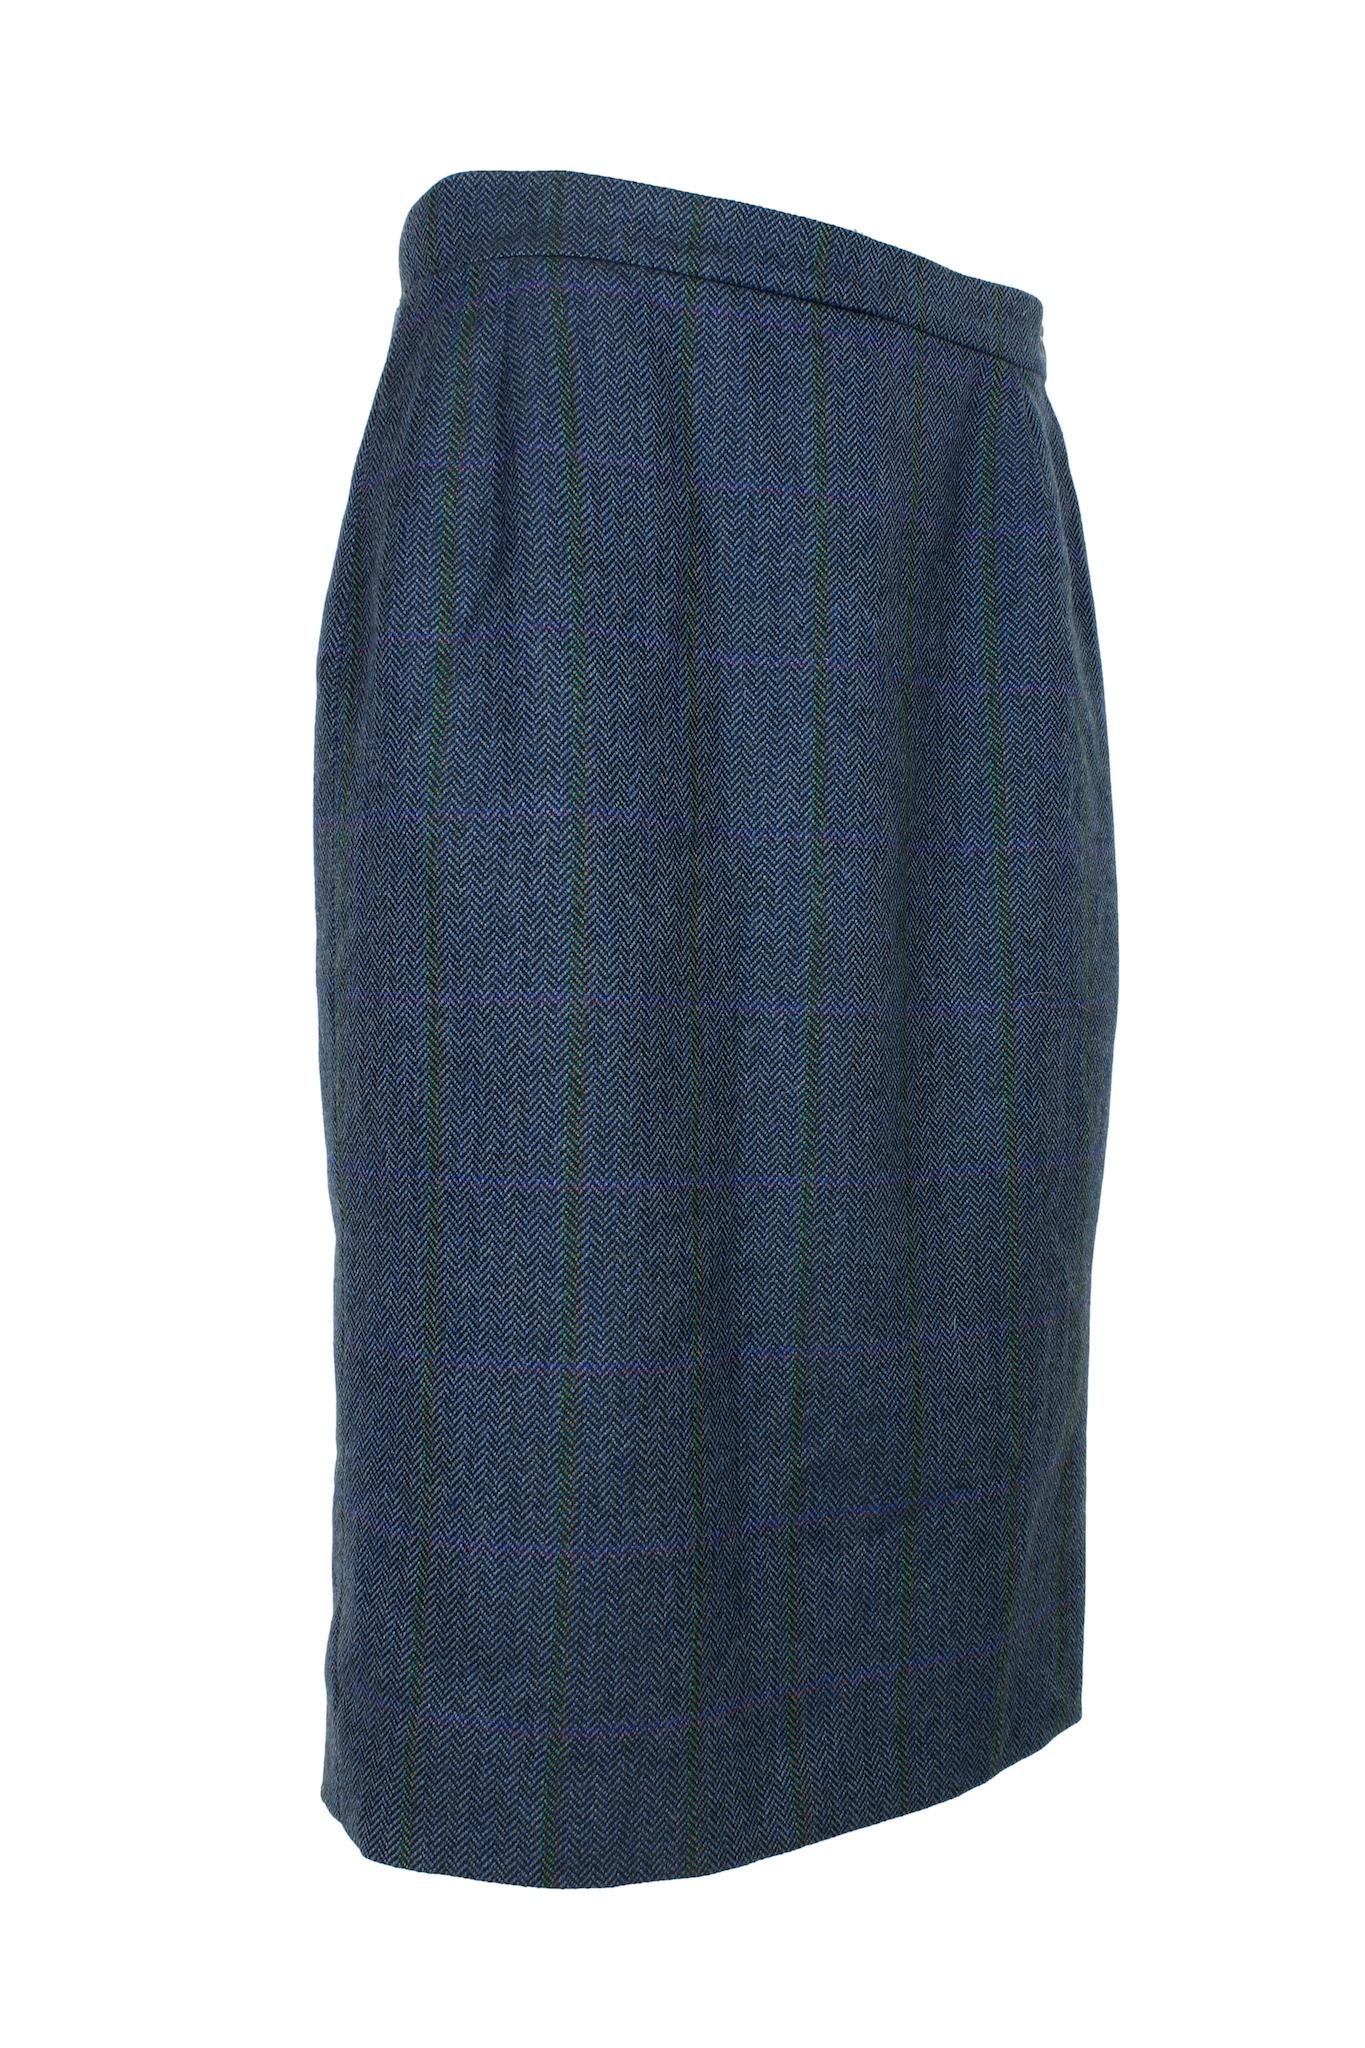 Burberry Blue Wool Herringbone Pencil Skirt 1980s In Excellent Condition For Sale In Brindisi, Bt